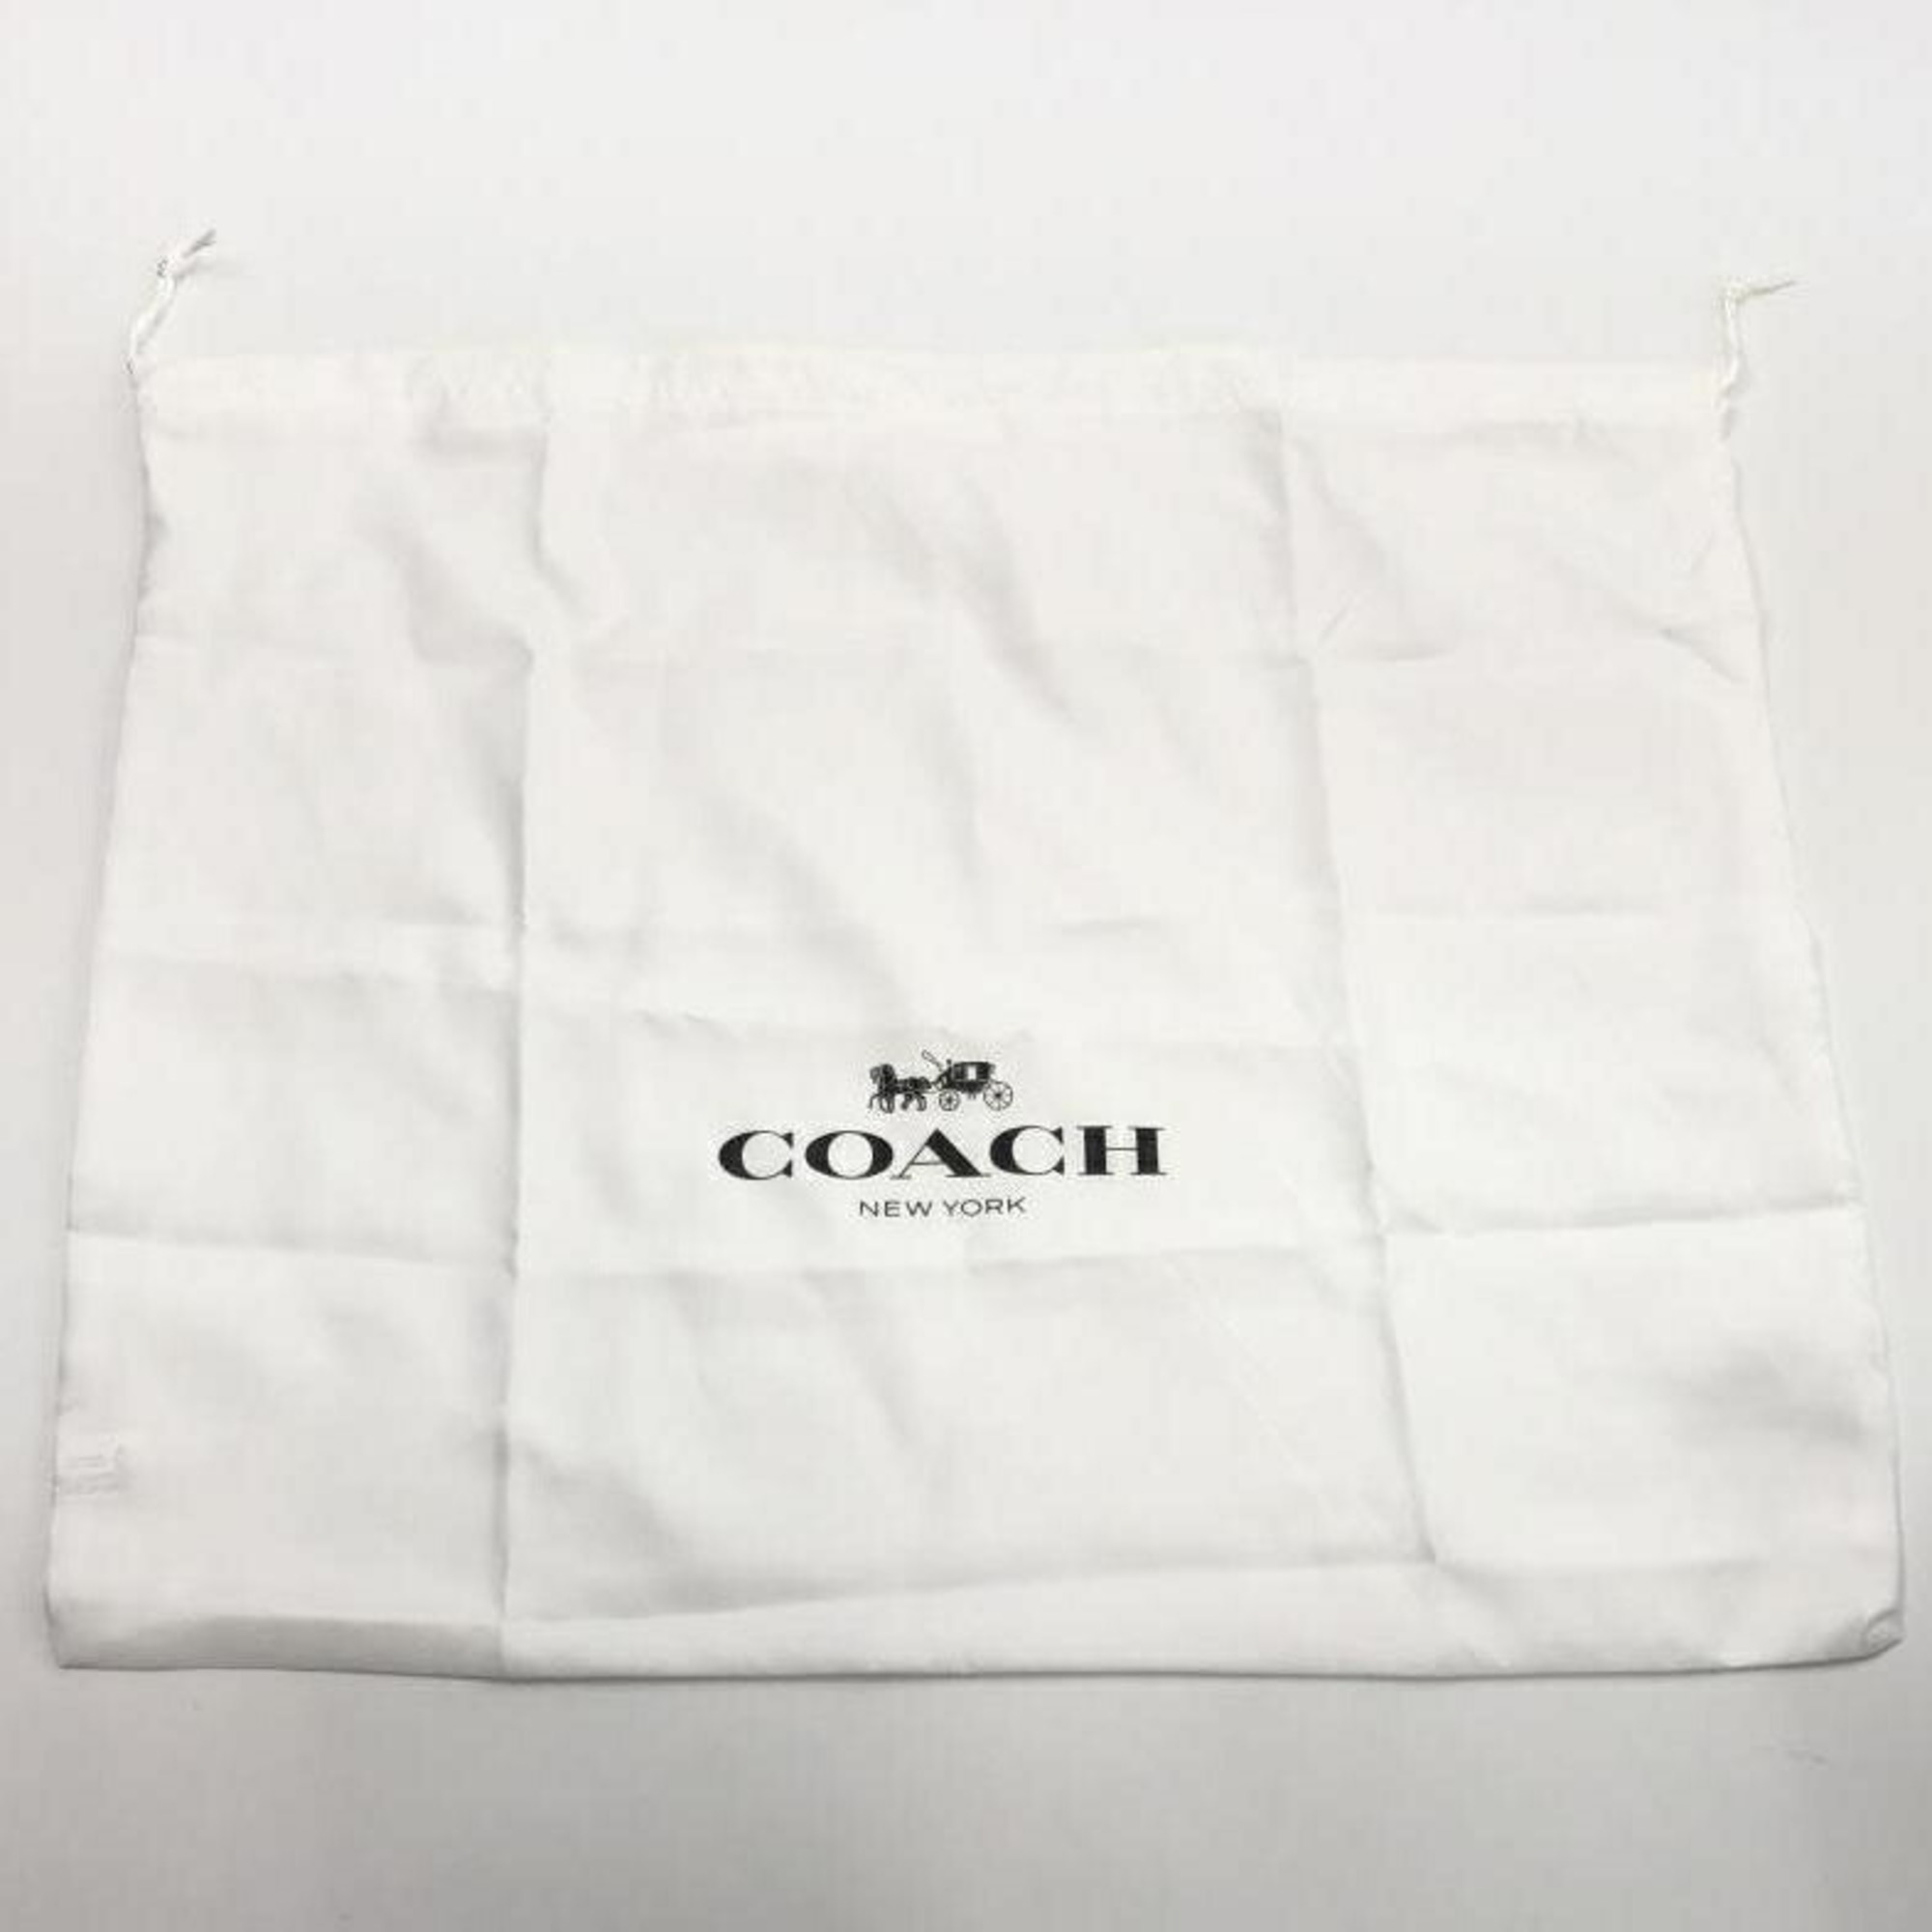 COACH OLISHED PEBBLE LEATHER EVERYDAY TOTO TOTE BAG